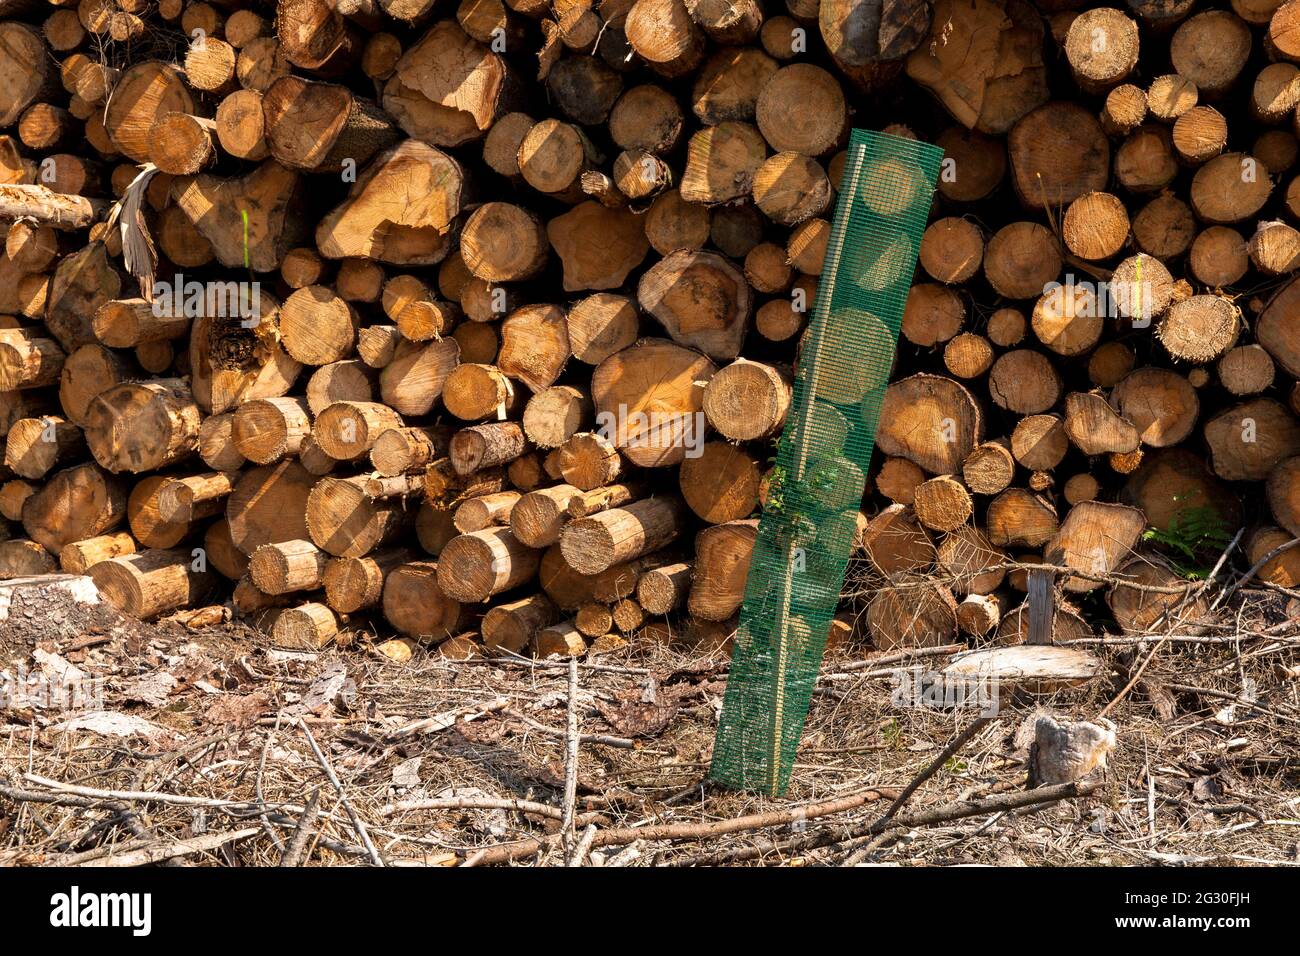 reforestation of a spruce forest in the Koenigsforst near Bergisch Gladbach that had died and been cleared due to water shortage and bark beetles, see Stock Photo